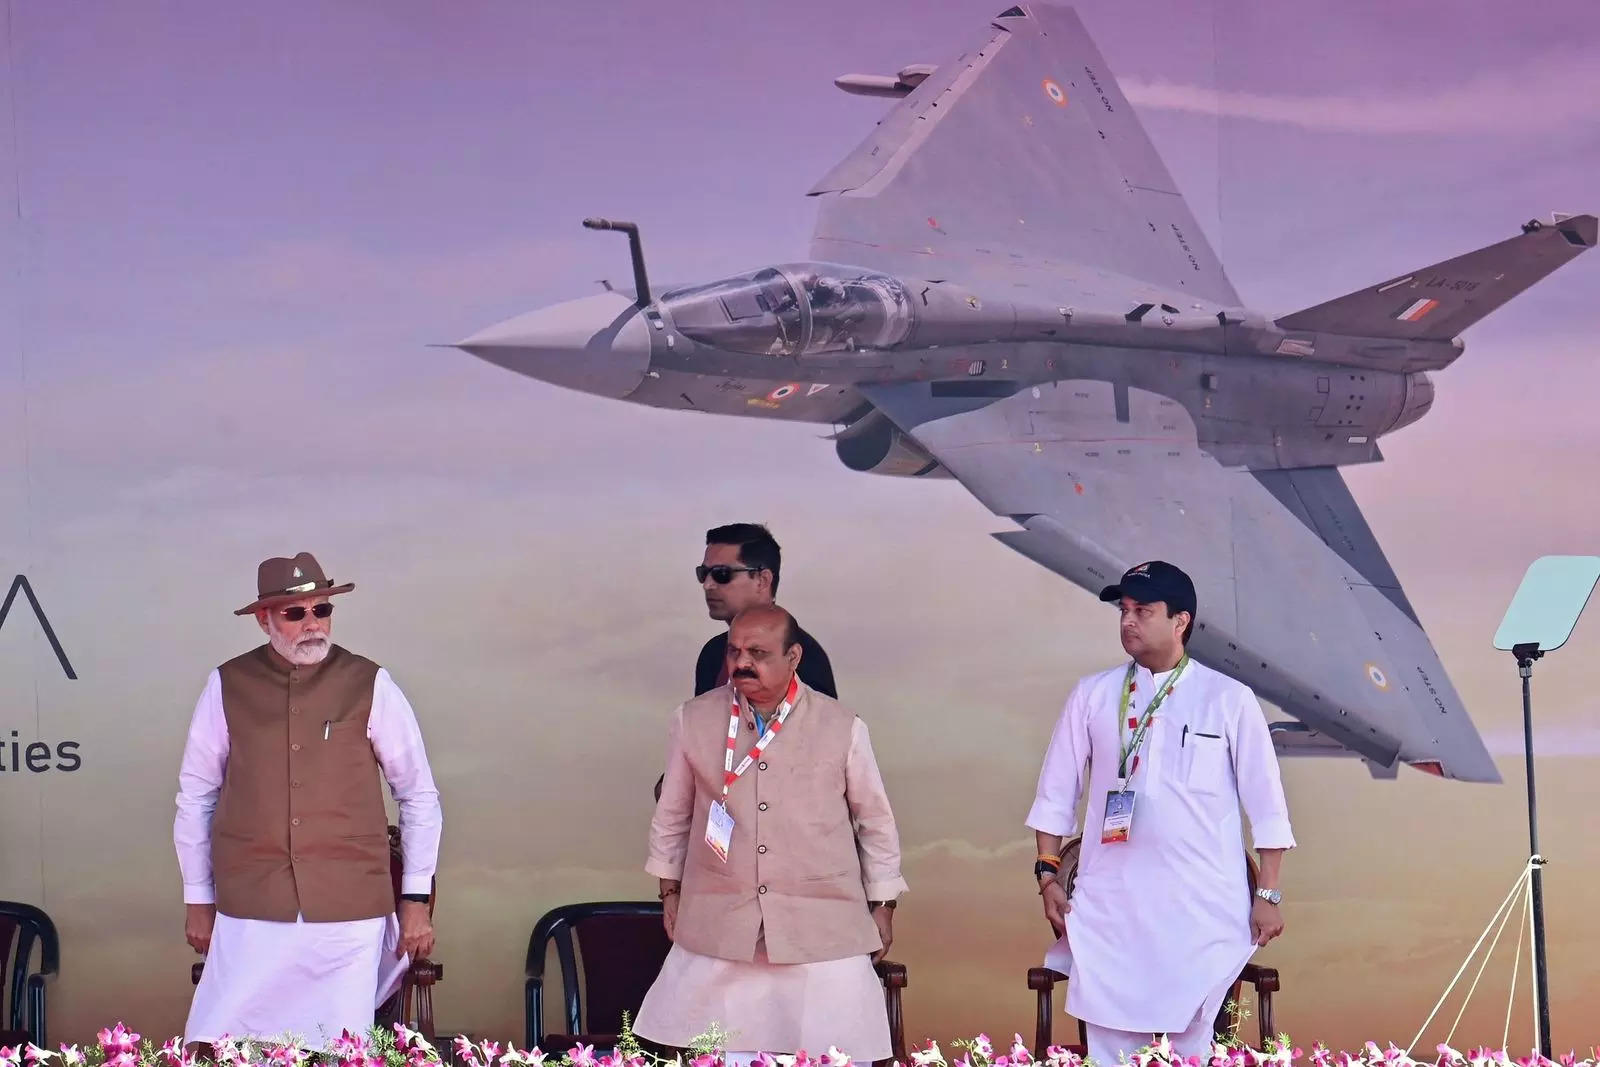  Prime Minister Narendra Modi attends the inauguration of the 14th edition of 'Aero India 2023' at the Yelahanka air force station in Bengaluru on Monday. (Photo by Manjunath KIRAN / AFP)